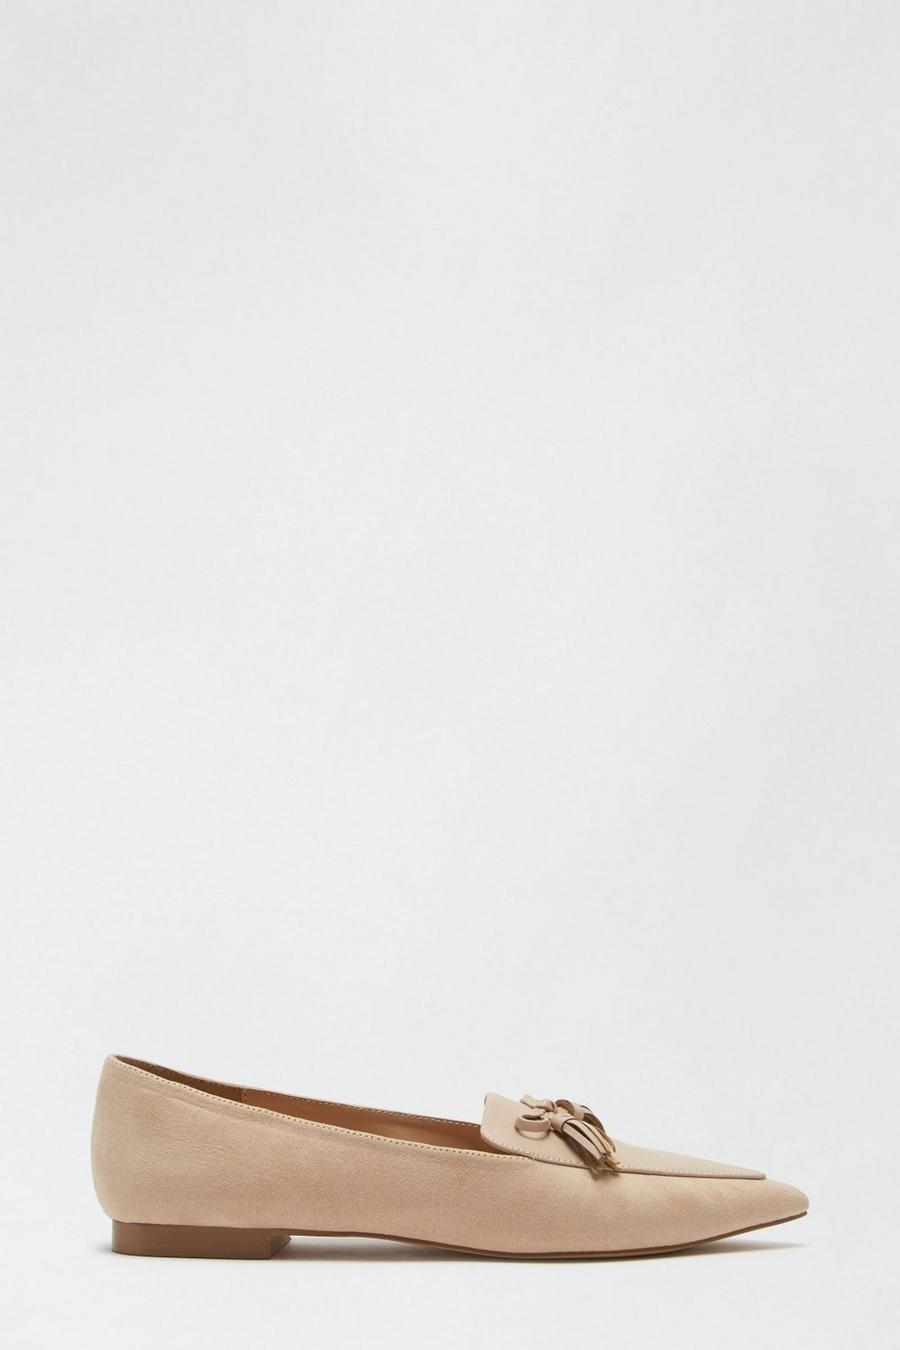 Blush 'Leco' Bow Tassel Point Loafer